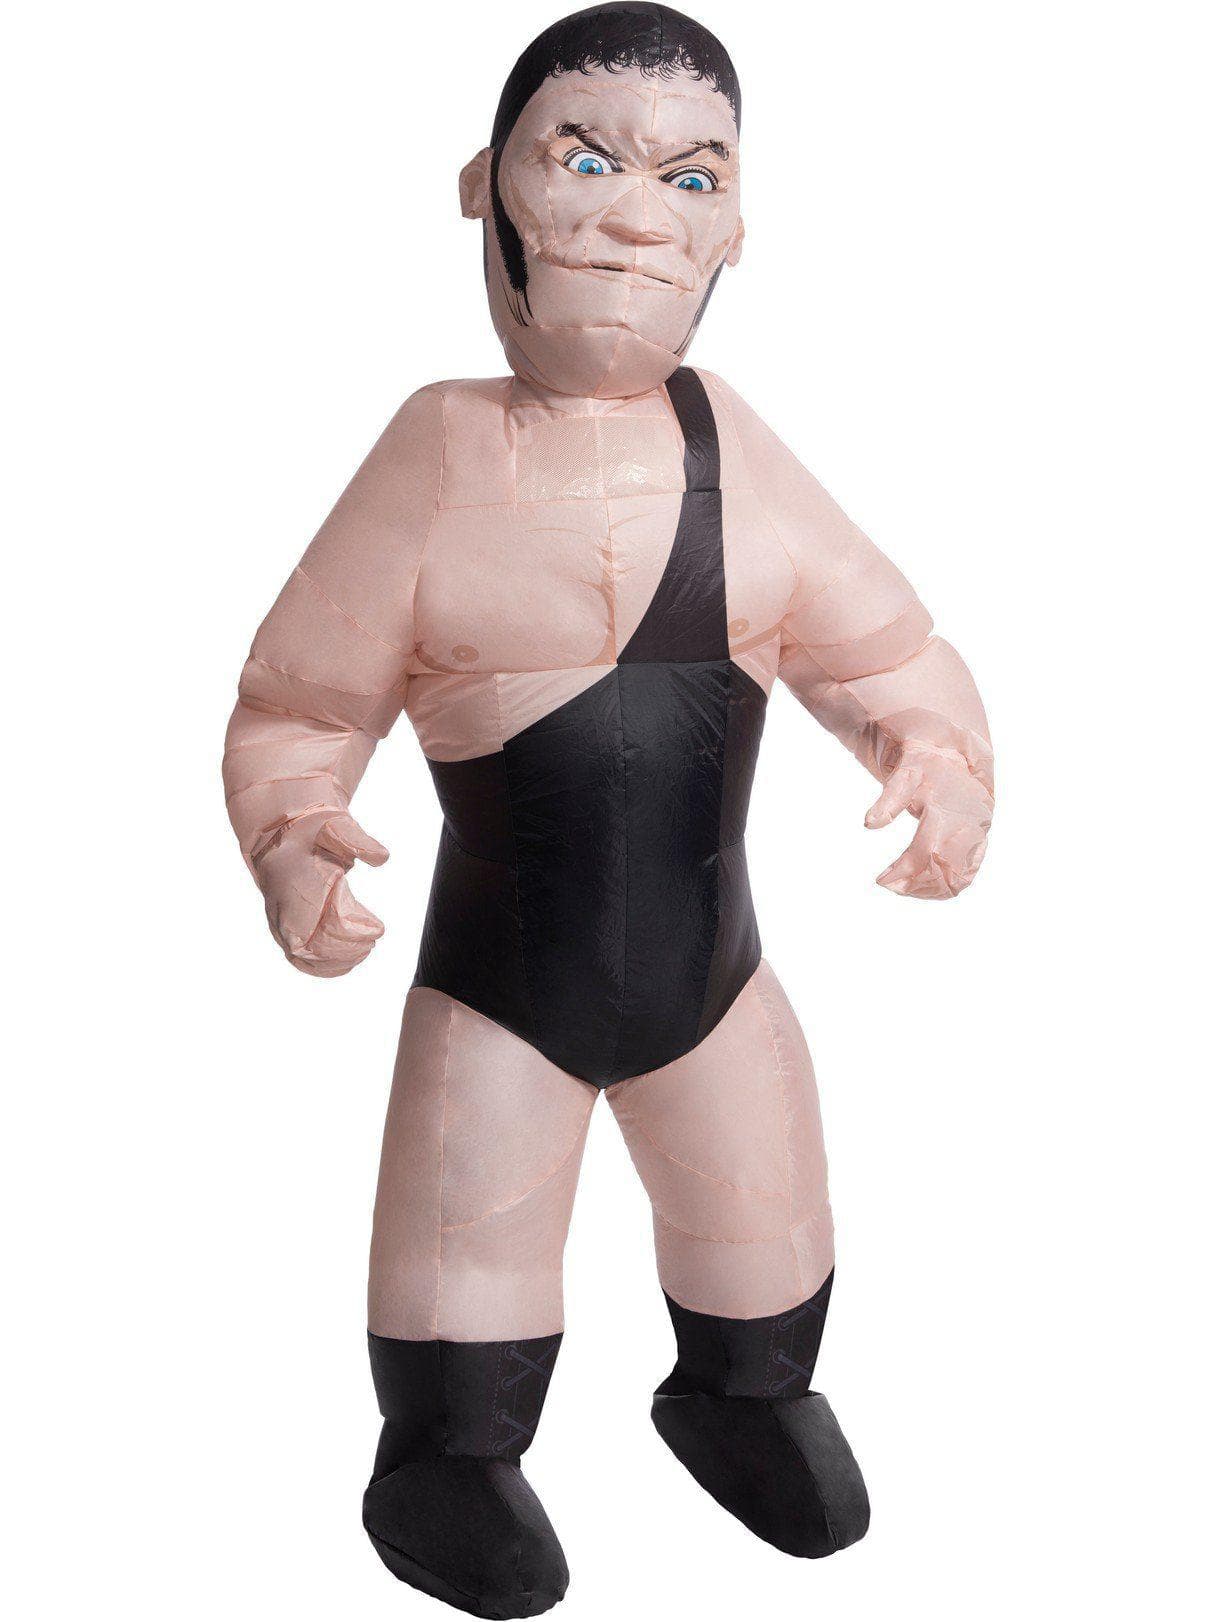 Men's WWE Andre the Giant Inflatable Costume - costumes.com